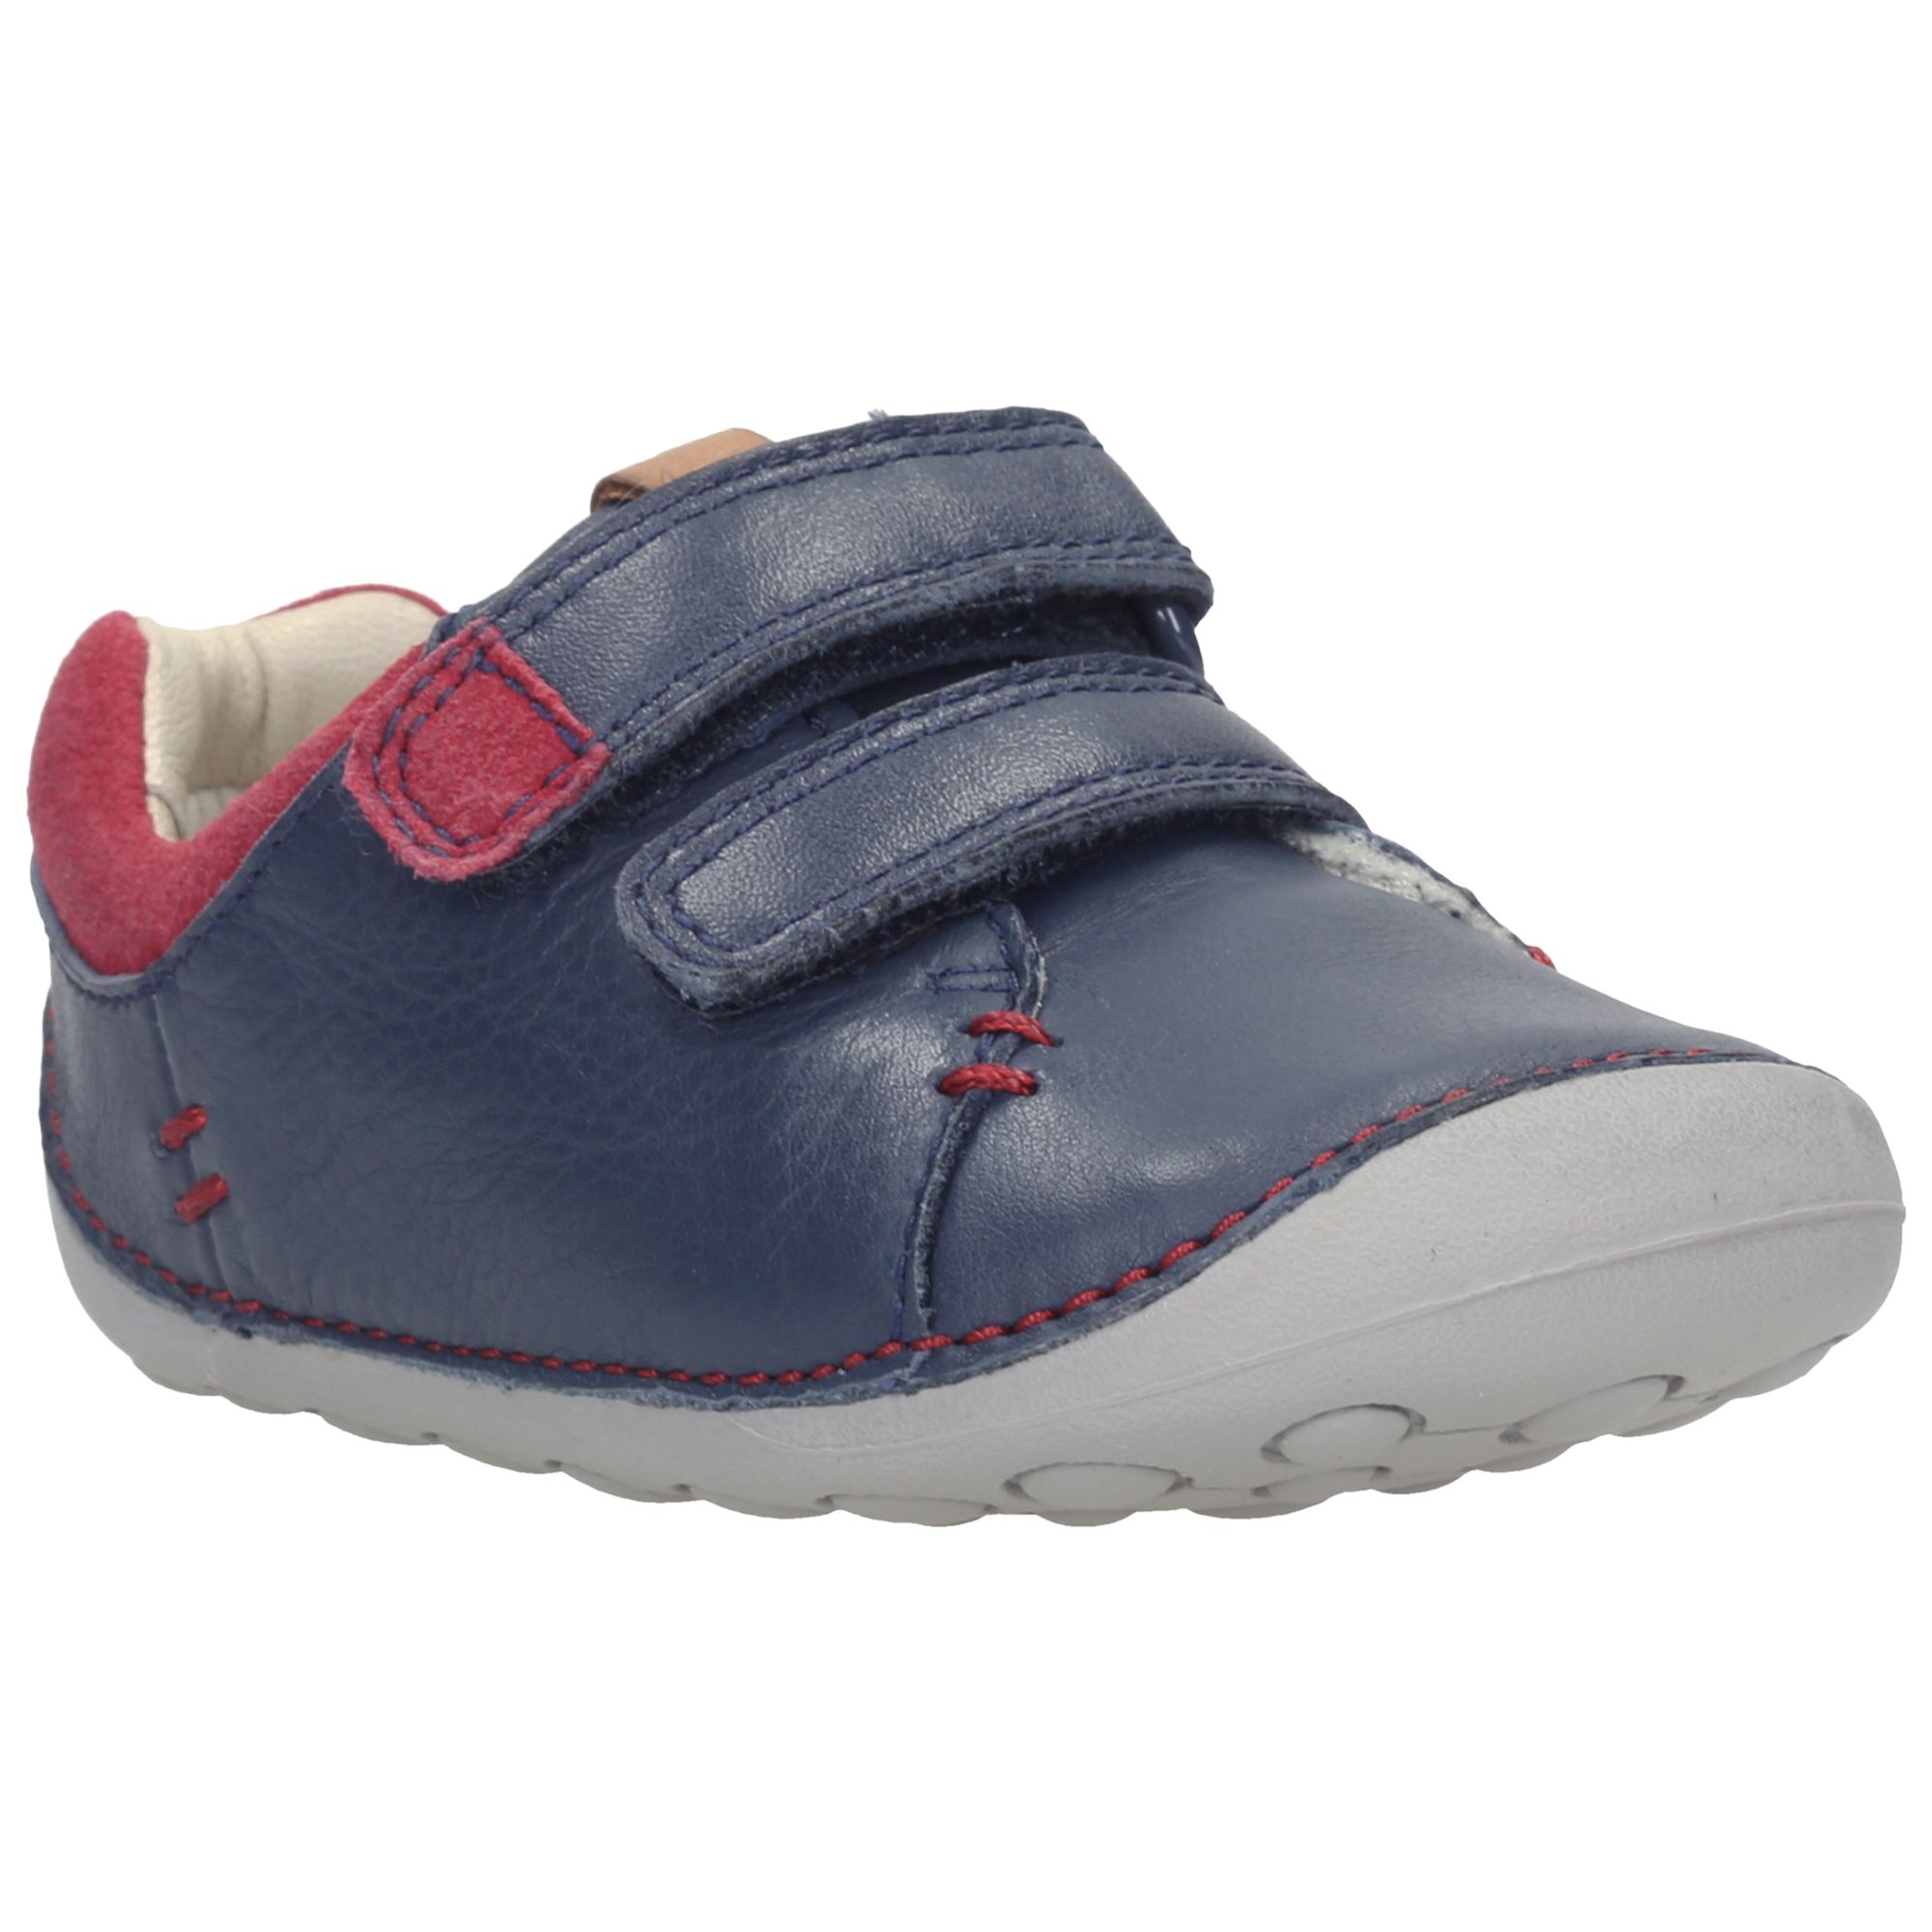 Clarks Tiny Toby Double Rip Tape Shoes, Navy, 4H Jnr